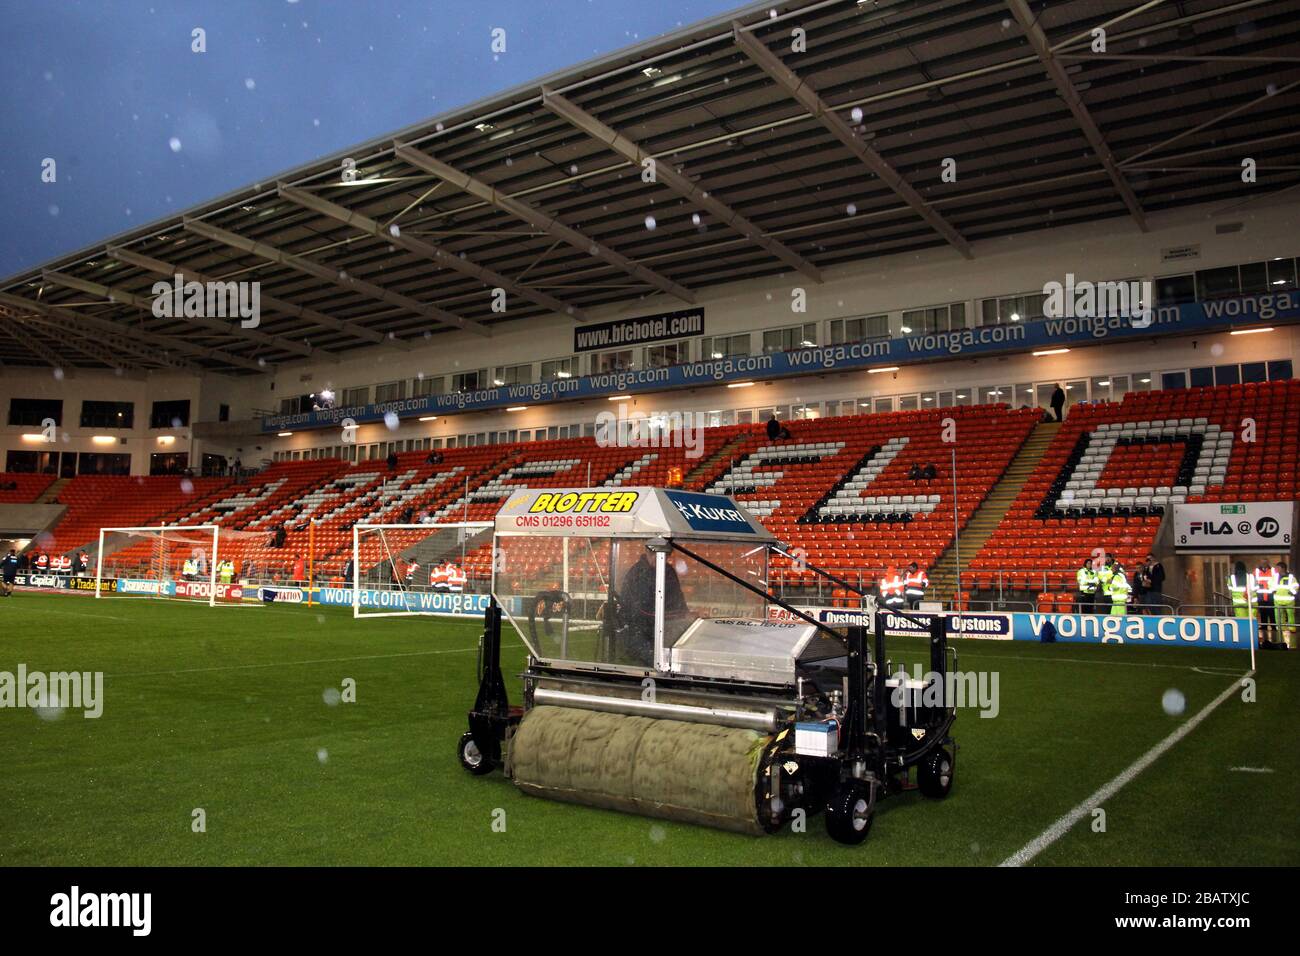 The Lancashire Cricket Club blotter on the Bloomfield Road pitch to soak up some of the standing water after heavy rainfall around the ground Stock Photo